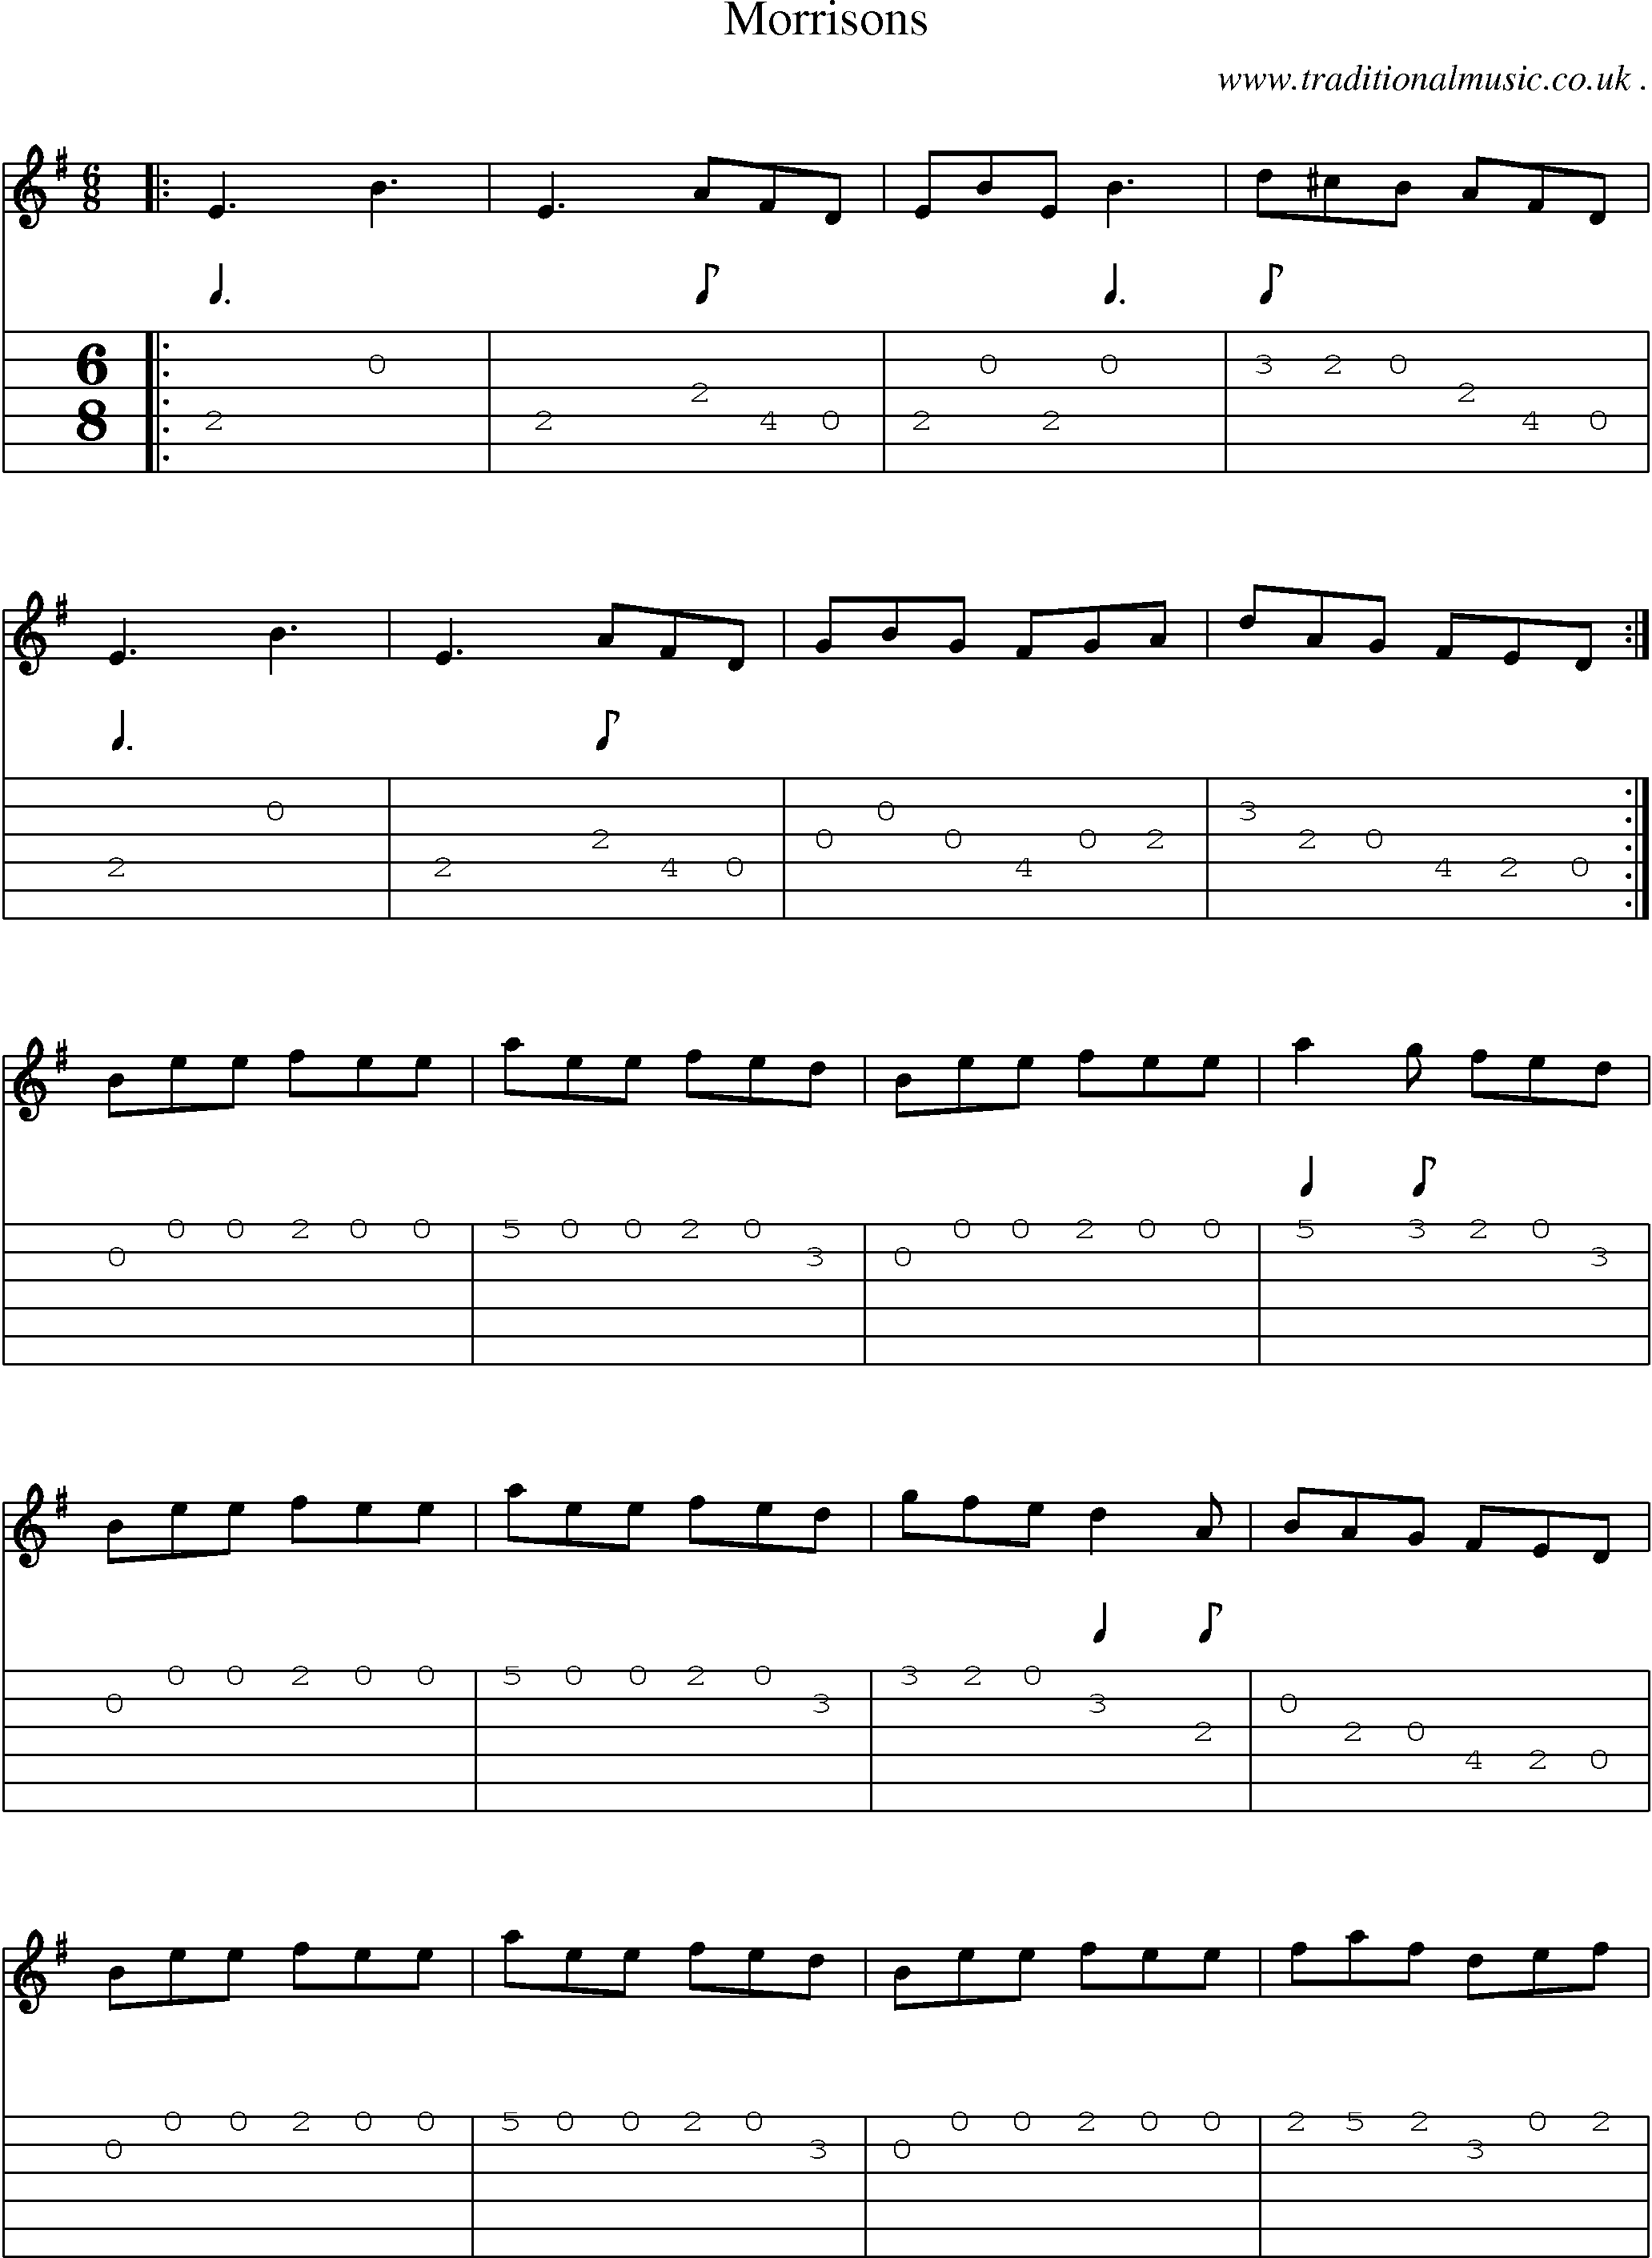 Sheet-Music and Guitar Tabs for Morrisons